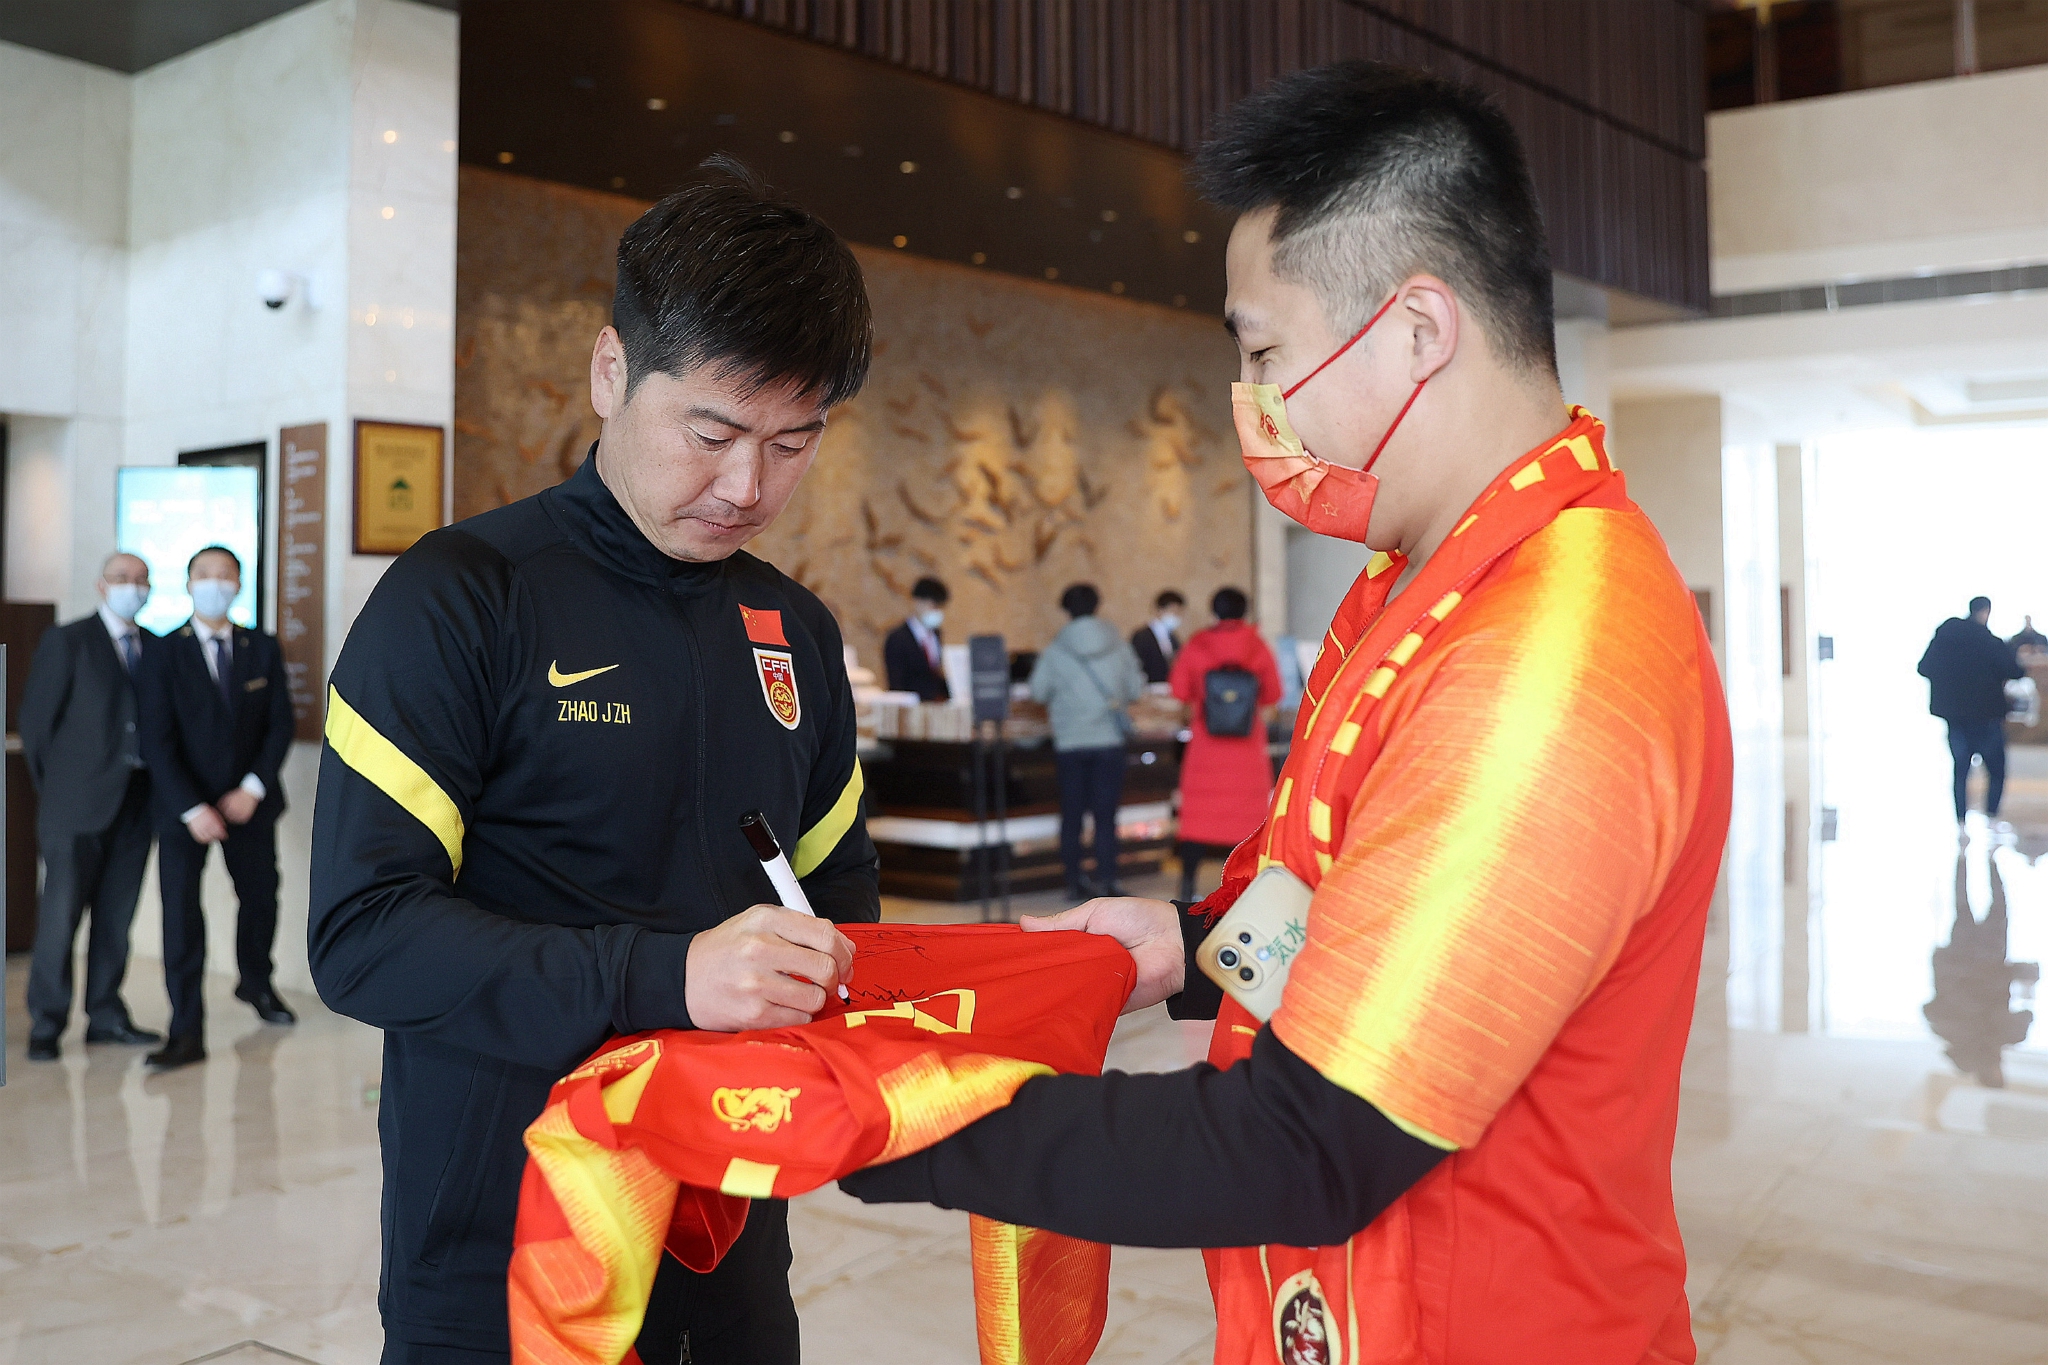 Zhao Junzhe, assistant coach of the national football team, signed autographs for fans.